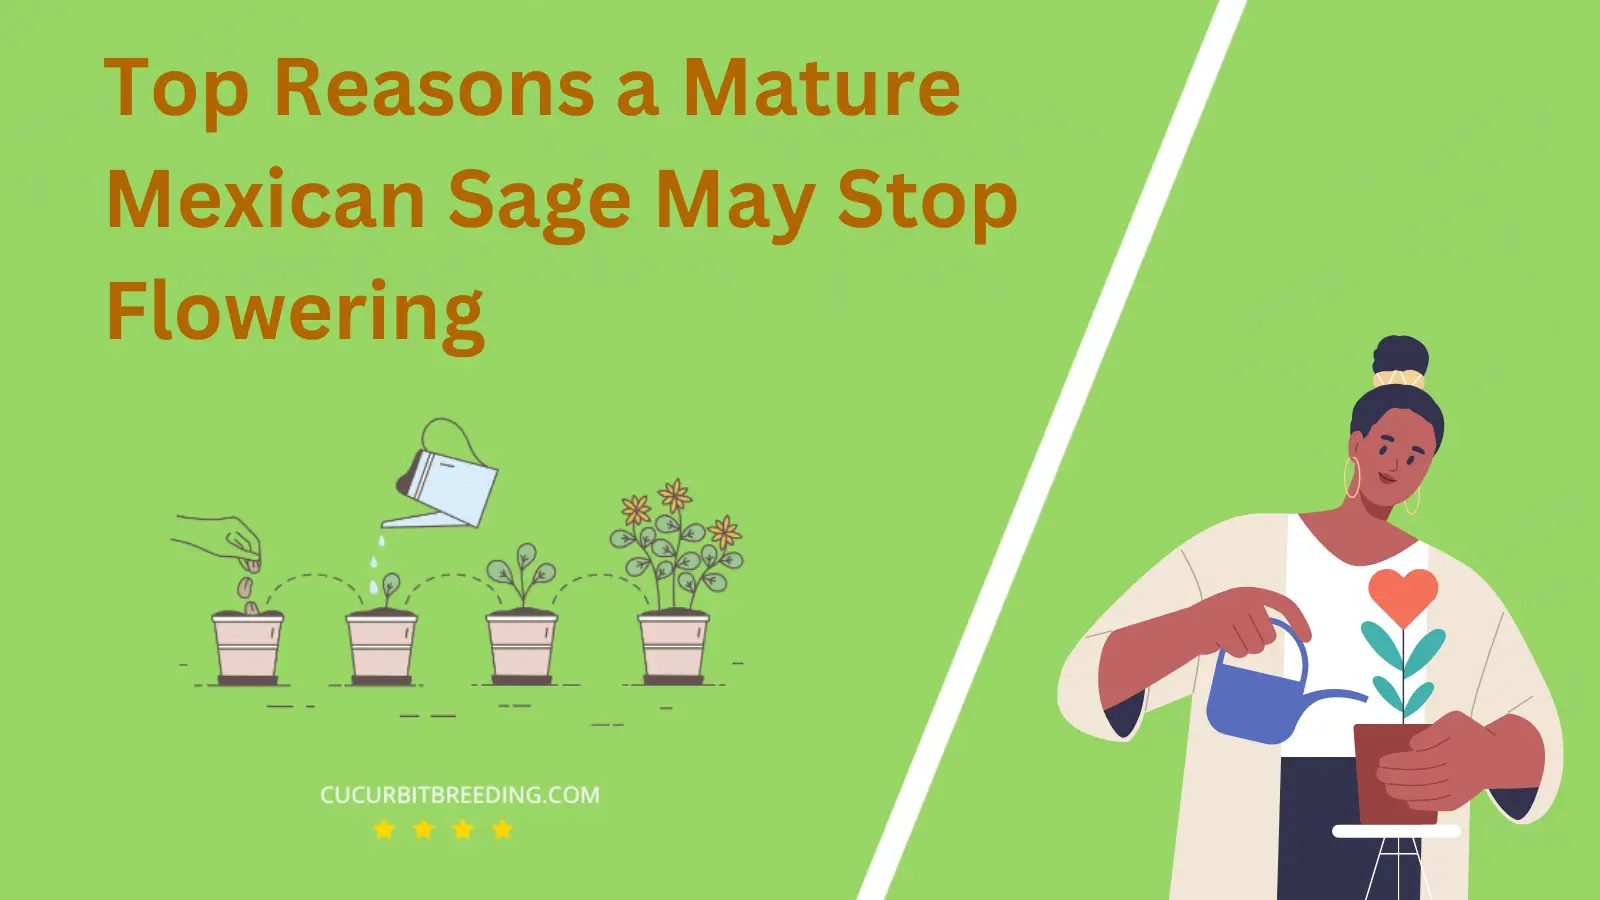 Top Reasons a Mature Mexican Sage May Stop Flowering